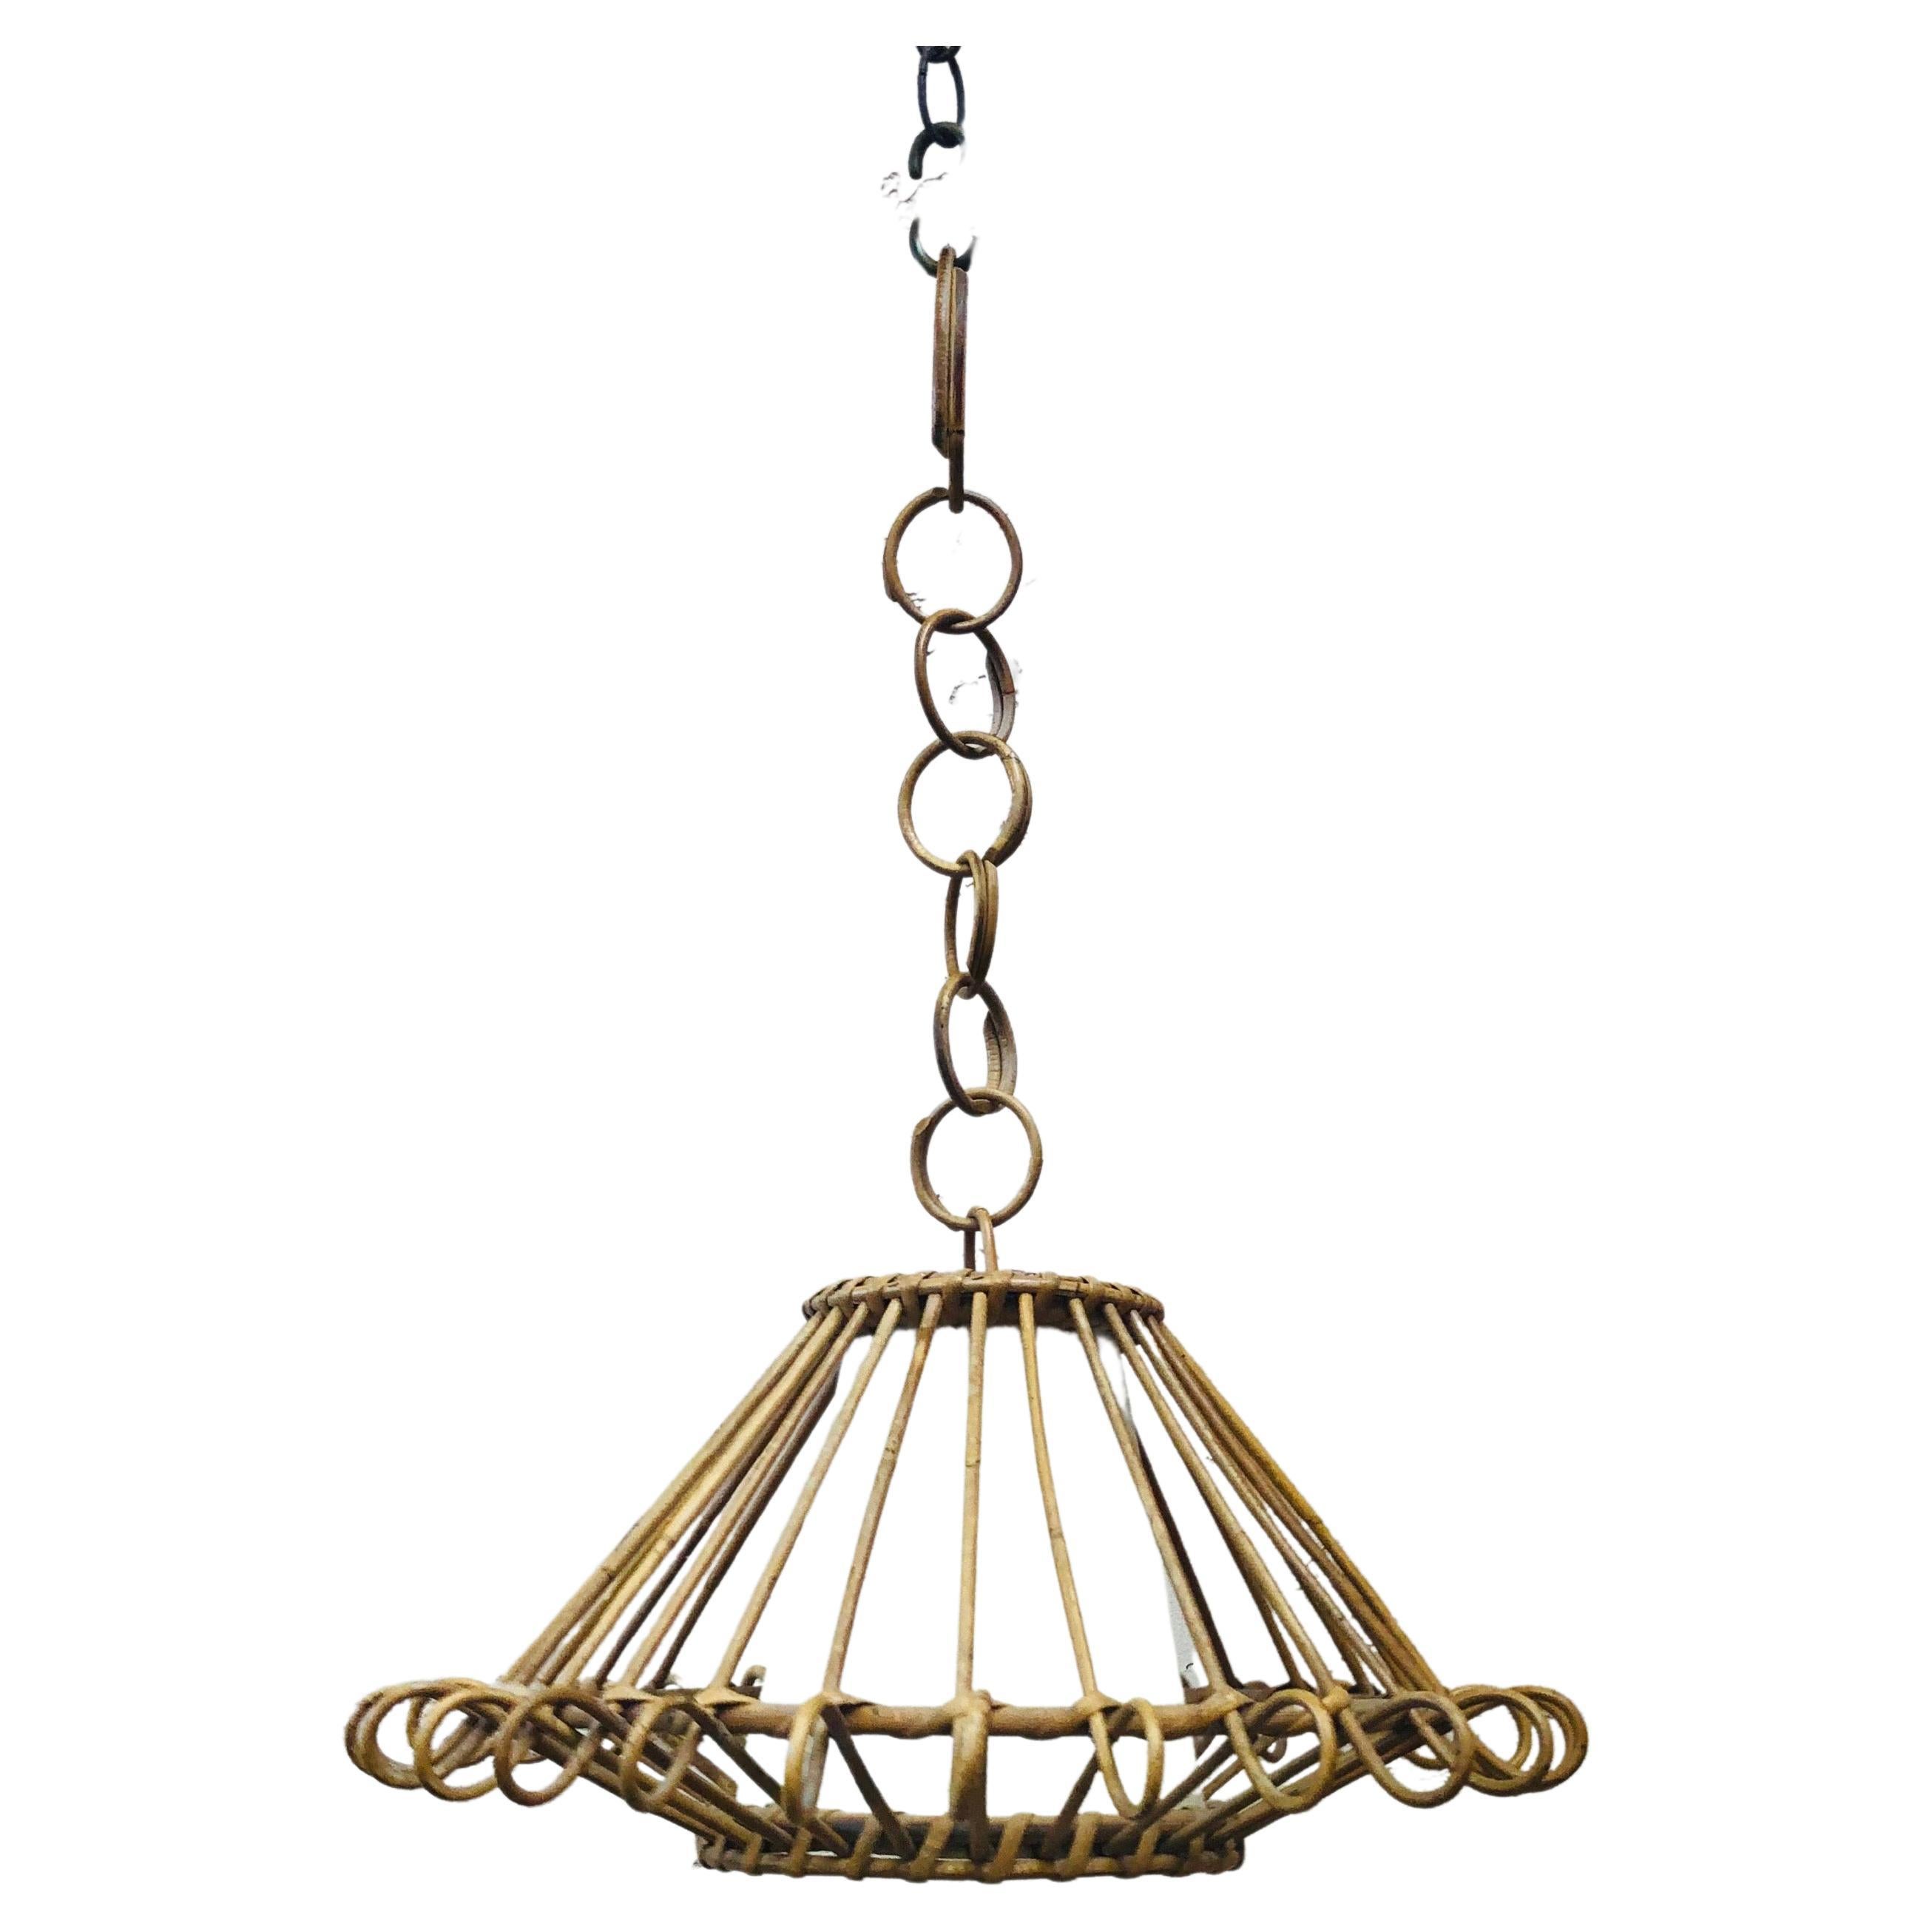 Large French Mid-century rattan chandelier Louis Sognot, circa 1950.
26 inches diameter.